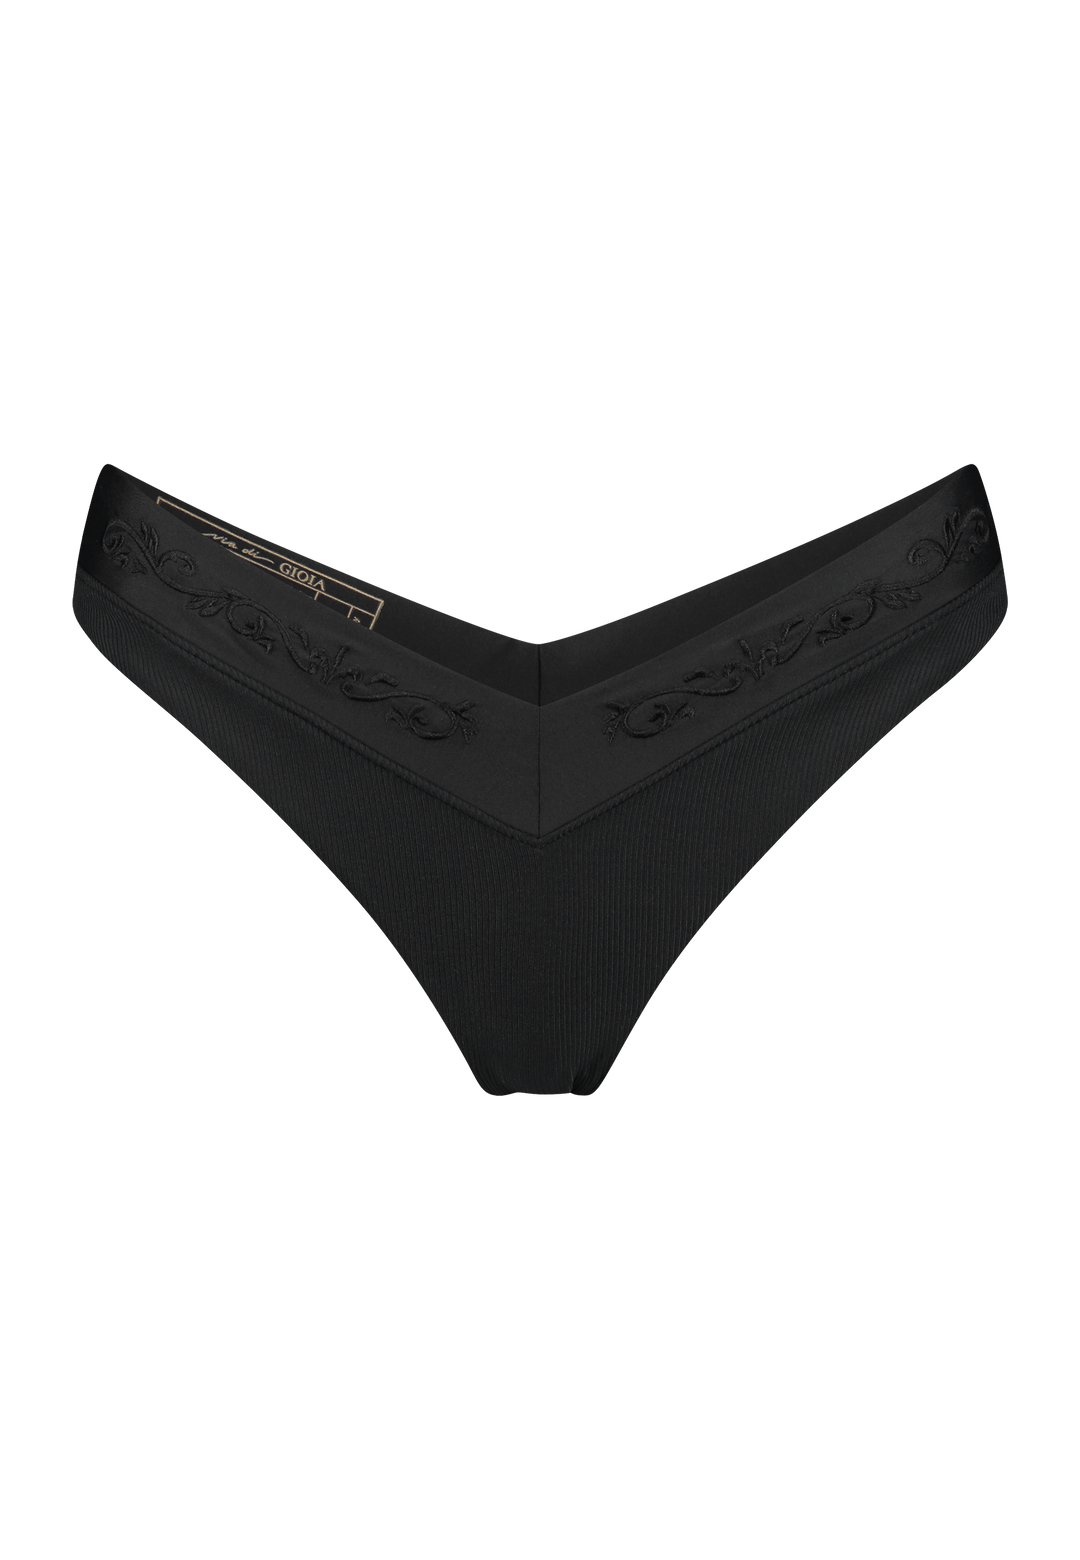 Bikini bottom V-shape in black with rib fabric and embroidery, product front